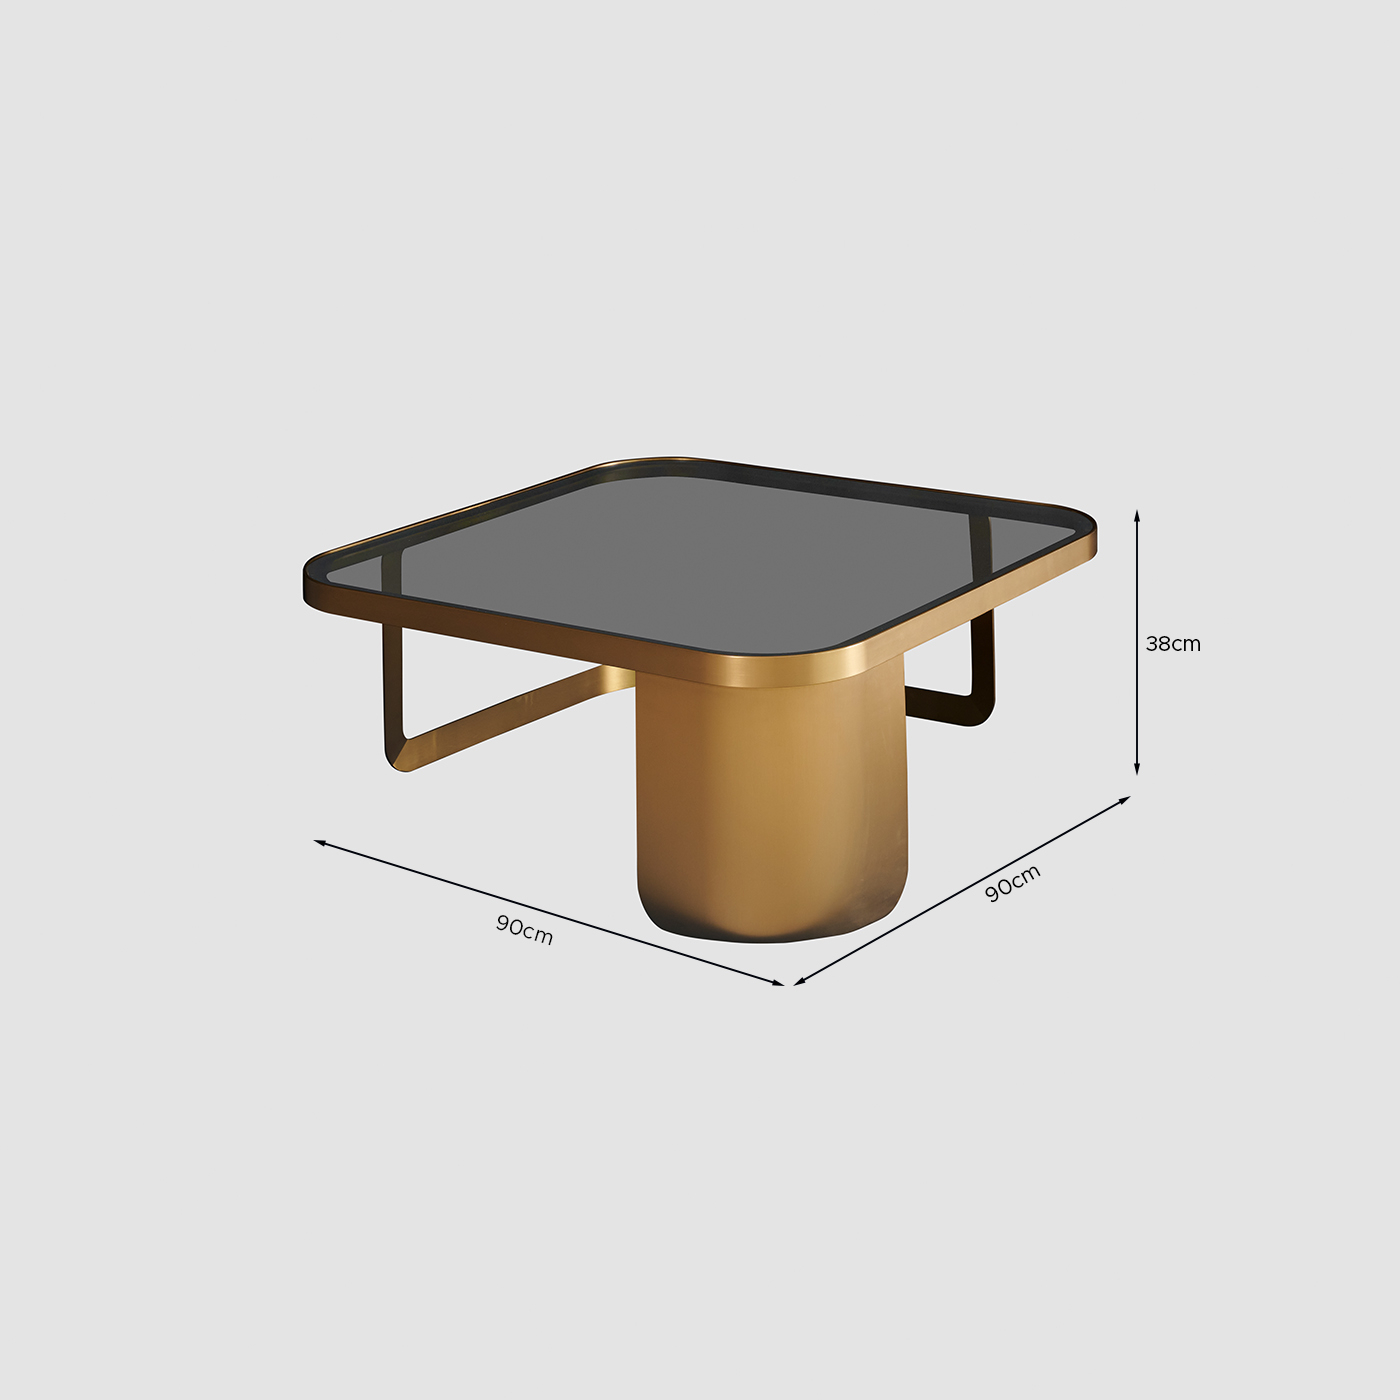 Diego Tables